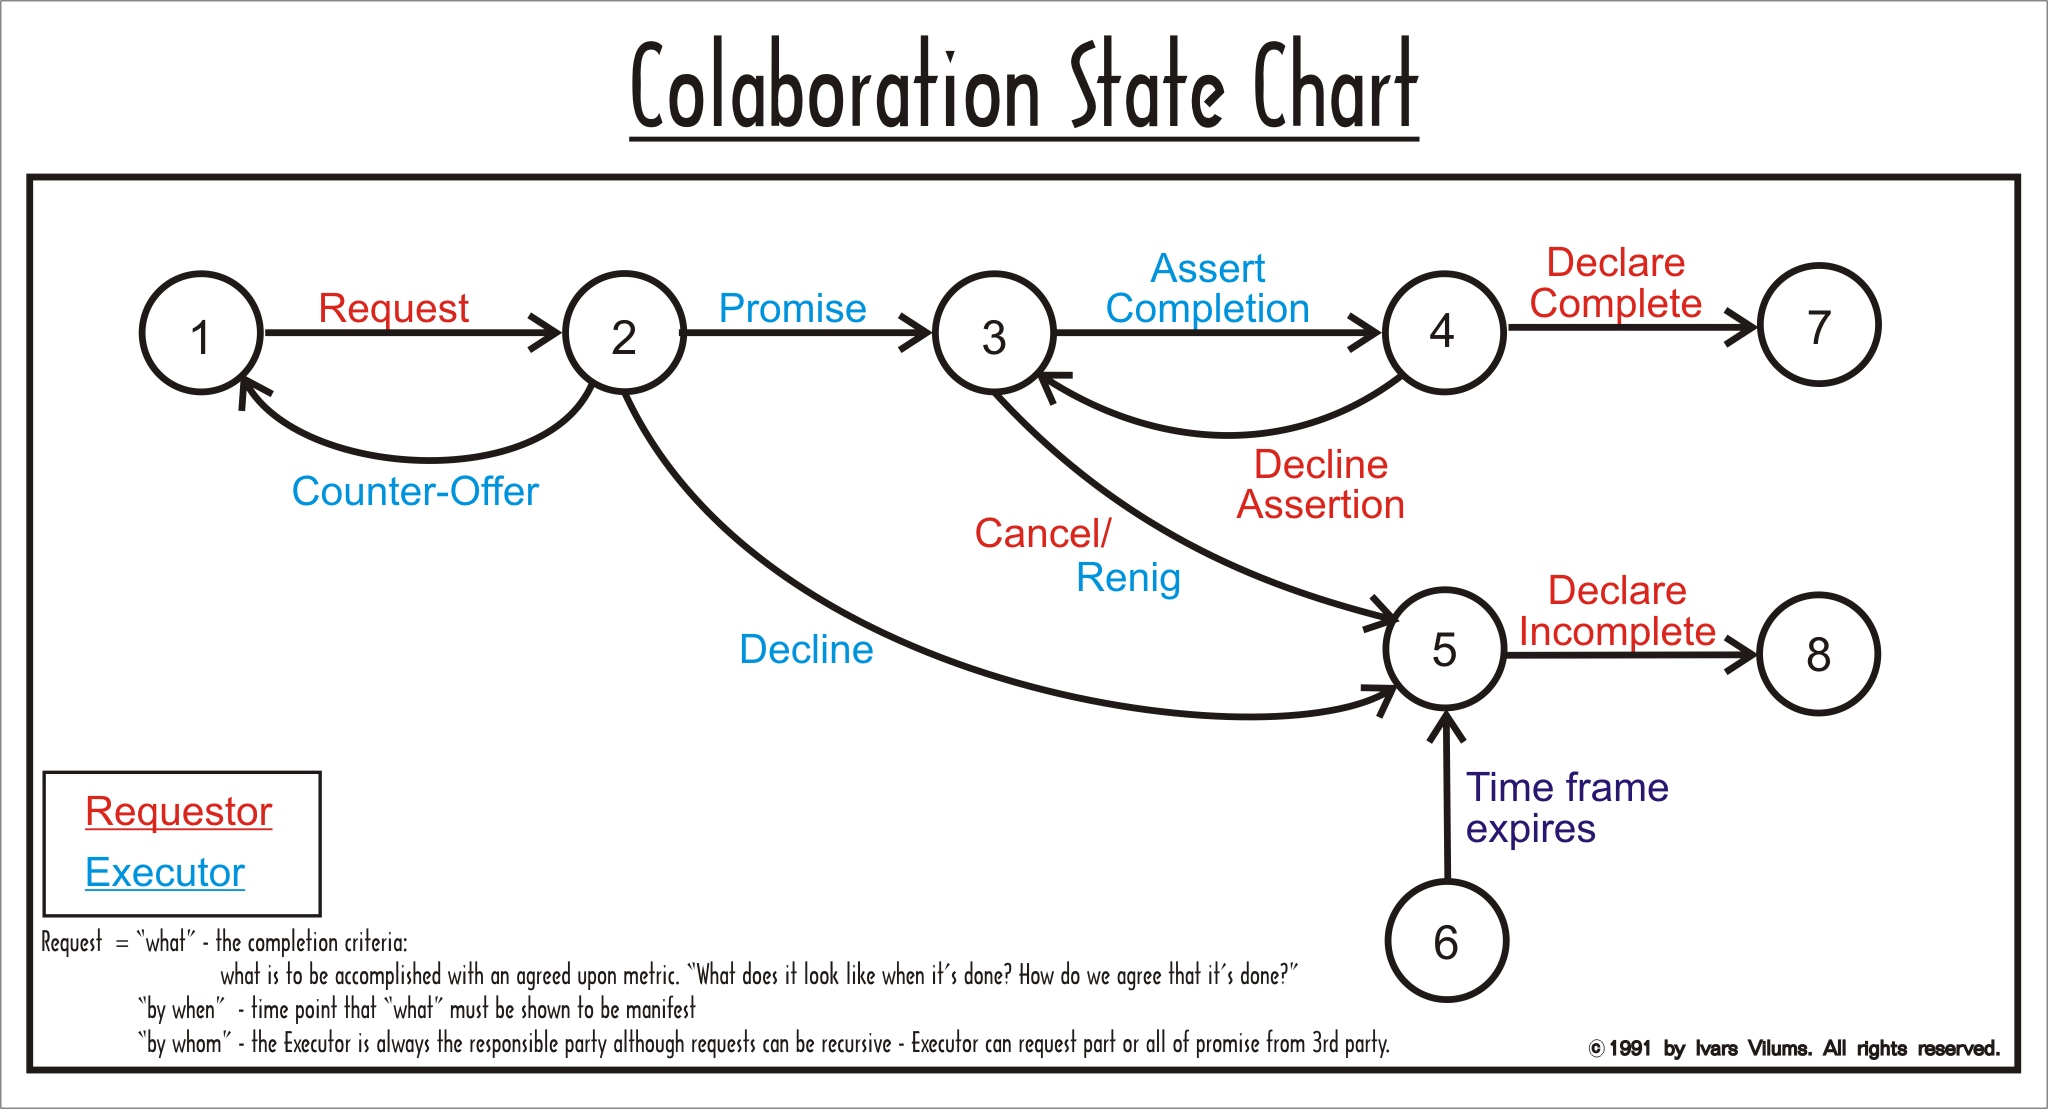 Colaboration State Chart